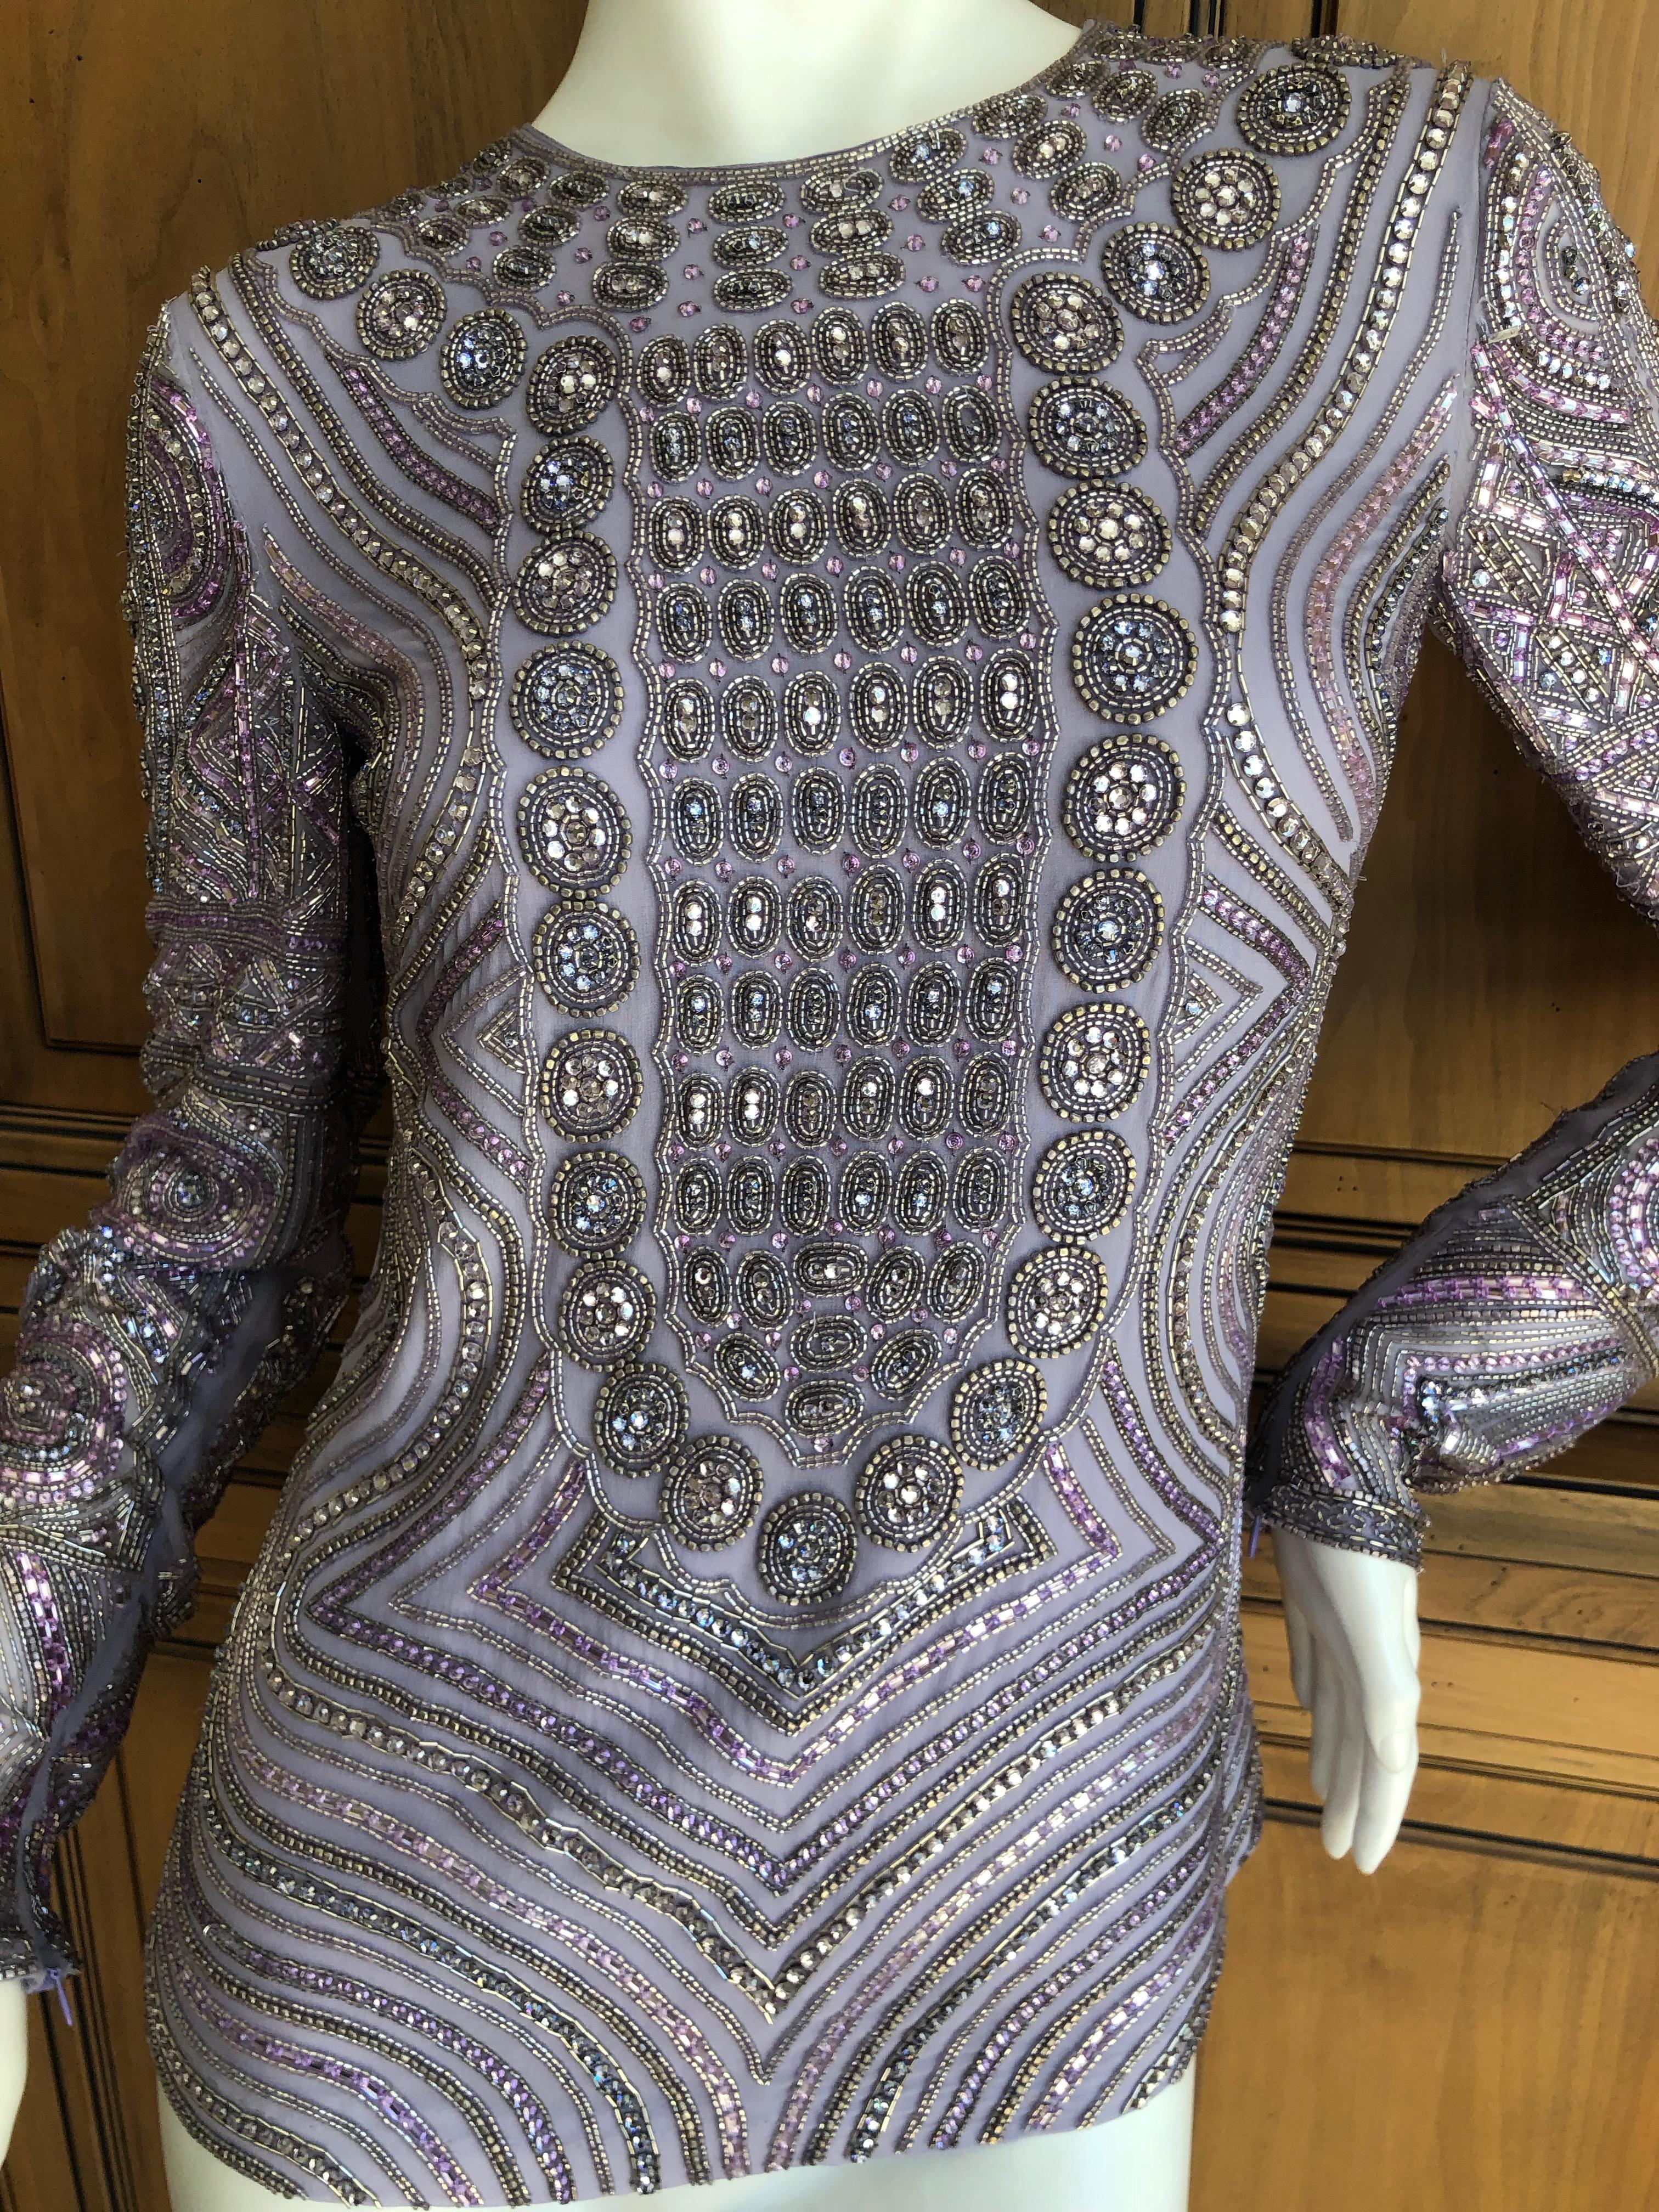 Emilio Pucci Remarkable Silk Bead and Crystal Embellished Top
This still has the store tags attached, the retail was $3260 USD
WOW 
Rare to see a completely embellished Pucci top, this is unreal.
The beads are glass, and this is quite heavy.
Size